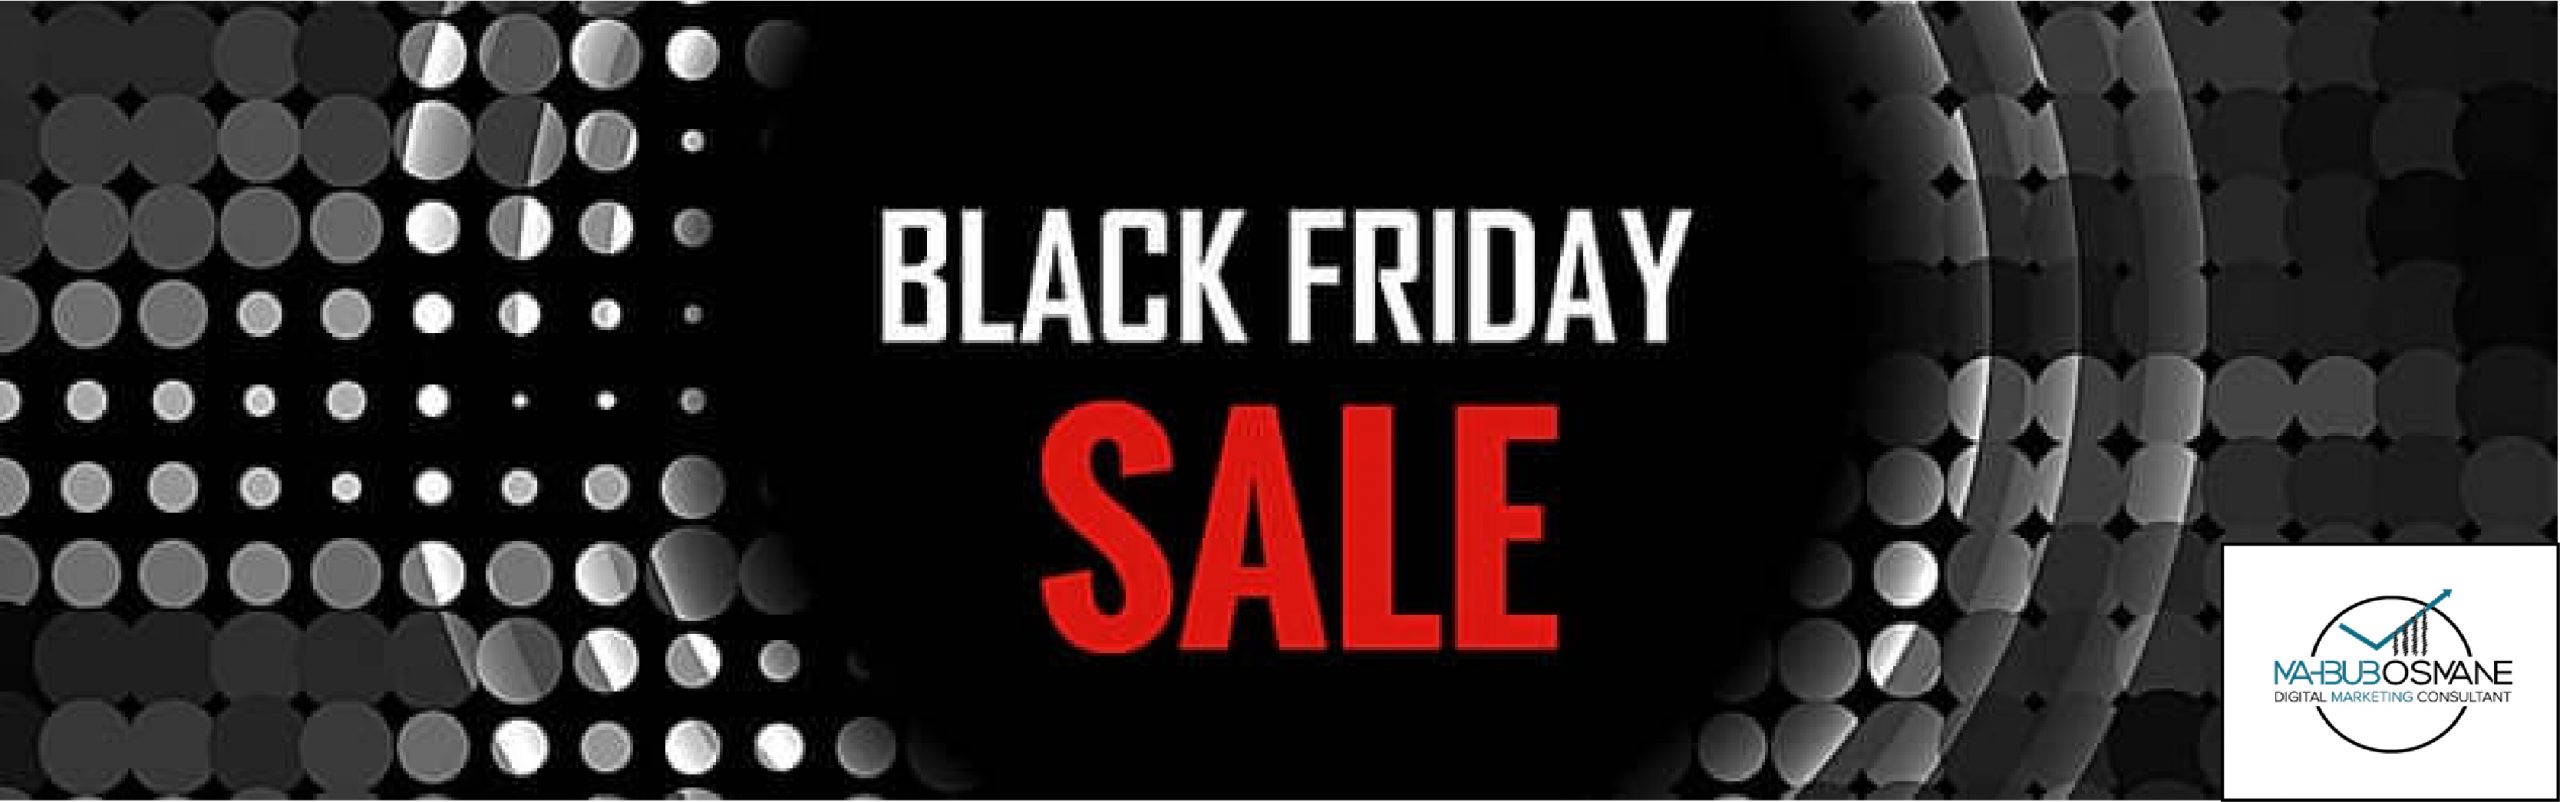 Black Friday Discounts of